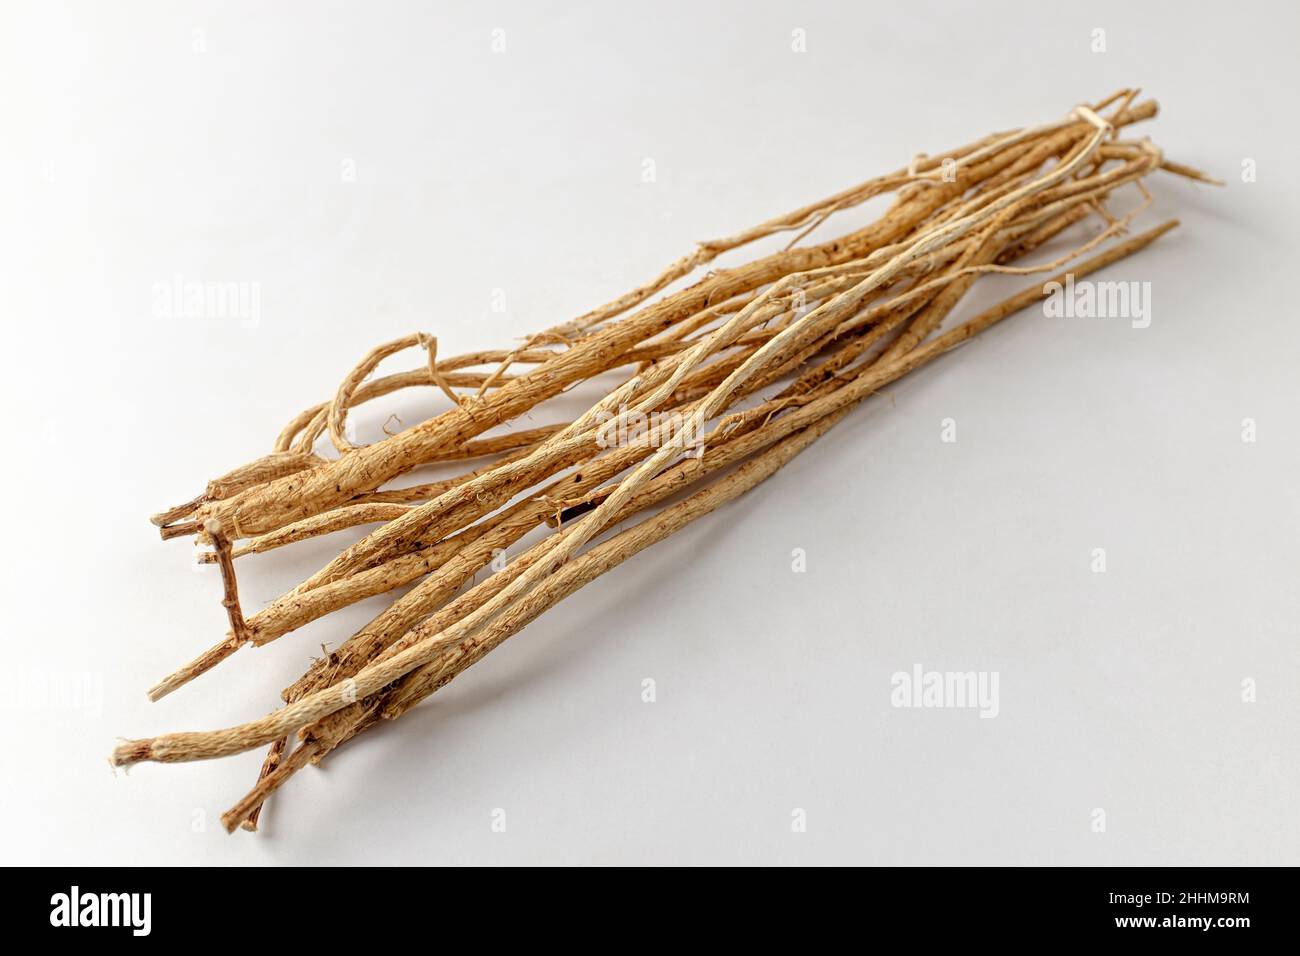 Astragalus root on a white background Stock Photo